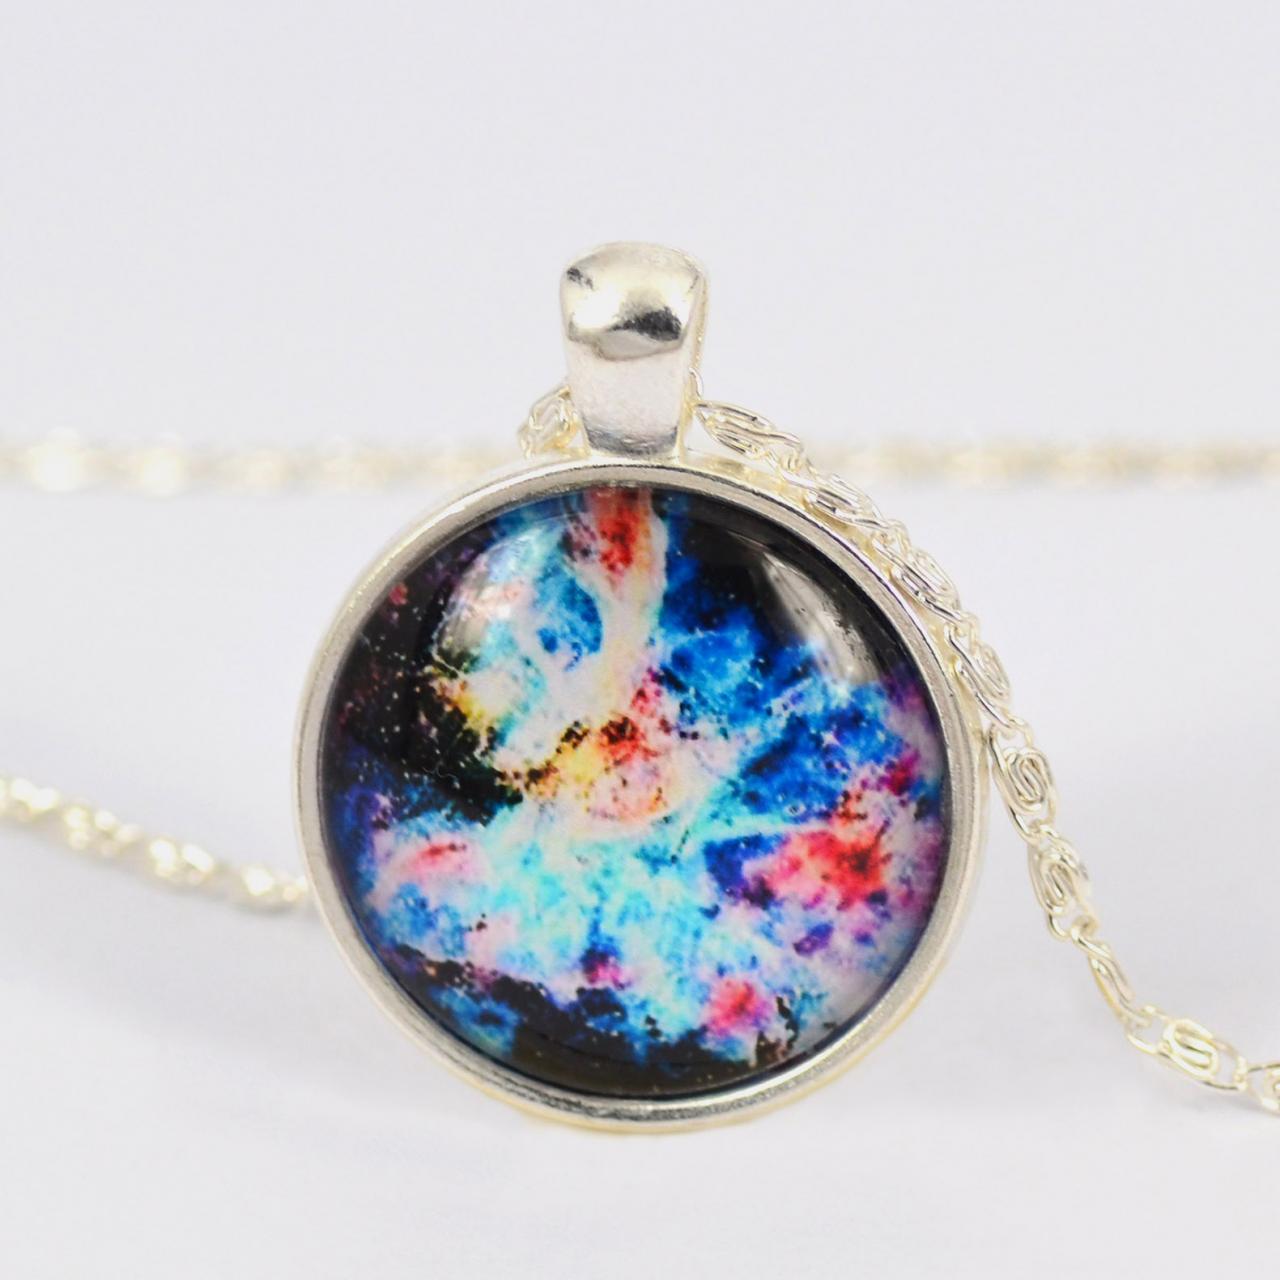 Fantasy Mysterious Universe Figure Pendant Glass Cabochon Necklace,silver Plated, Glass Dome Necklace#ib734